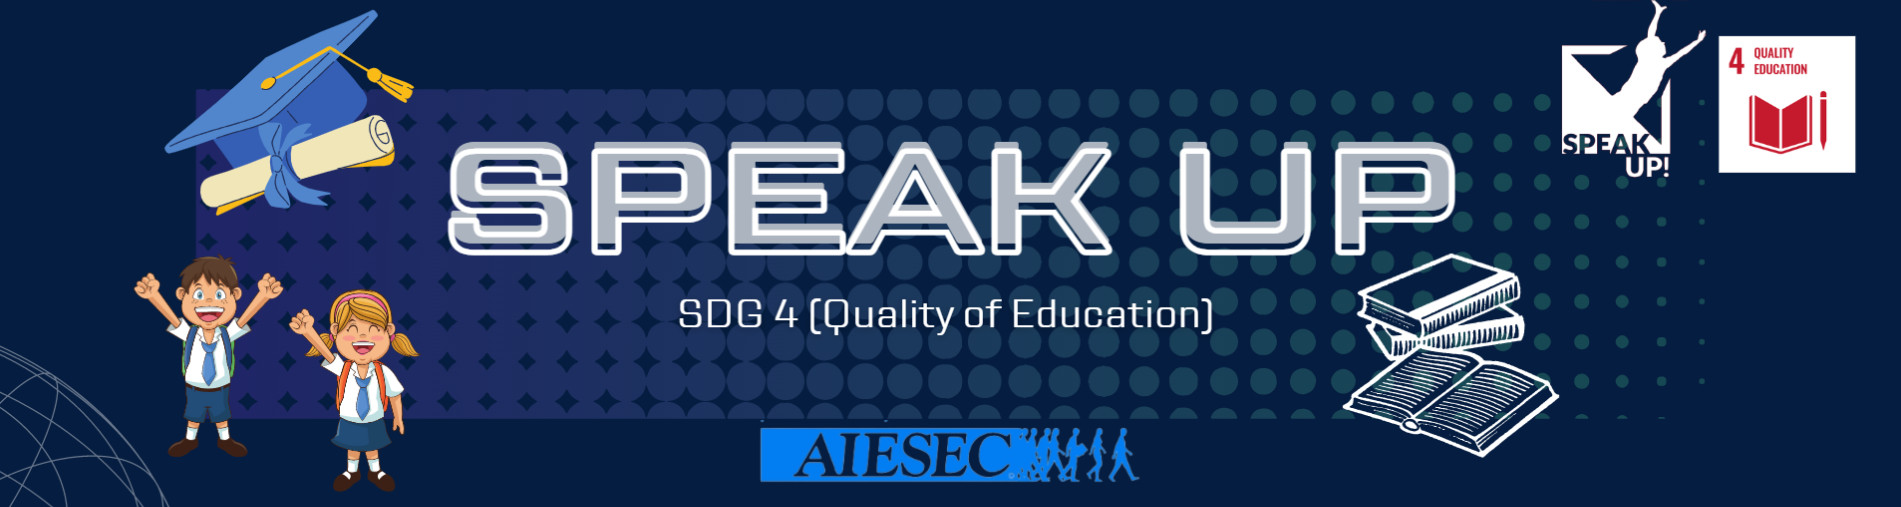 Speak Up Project _SDG 4.0 (Quality of Education)